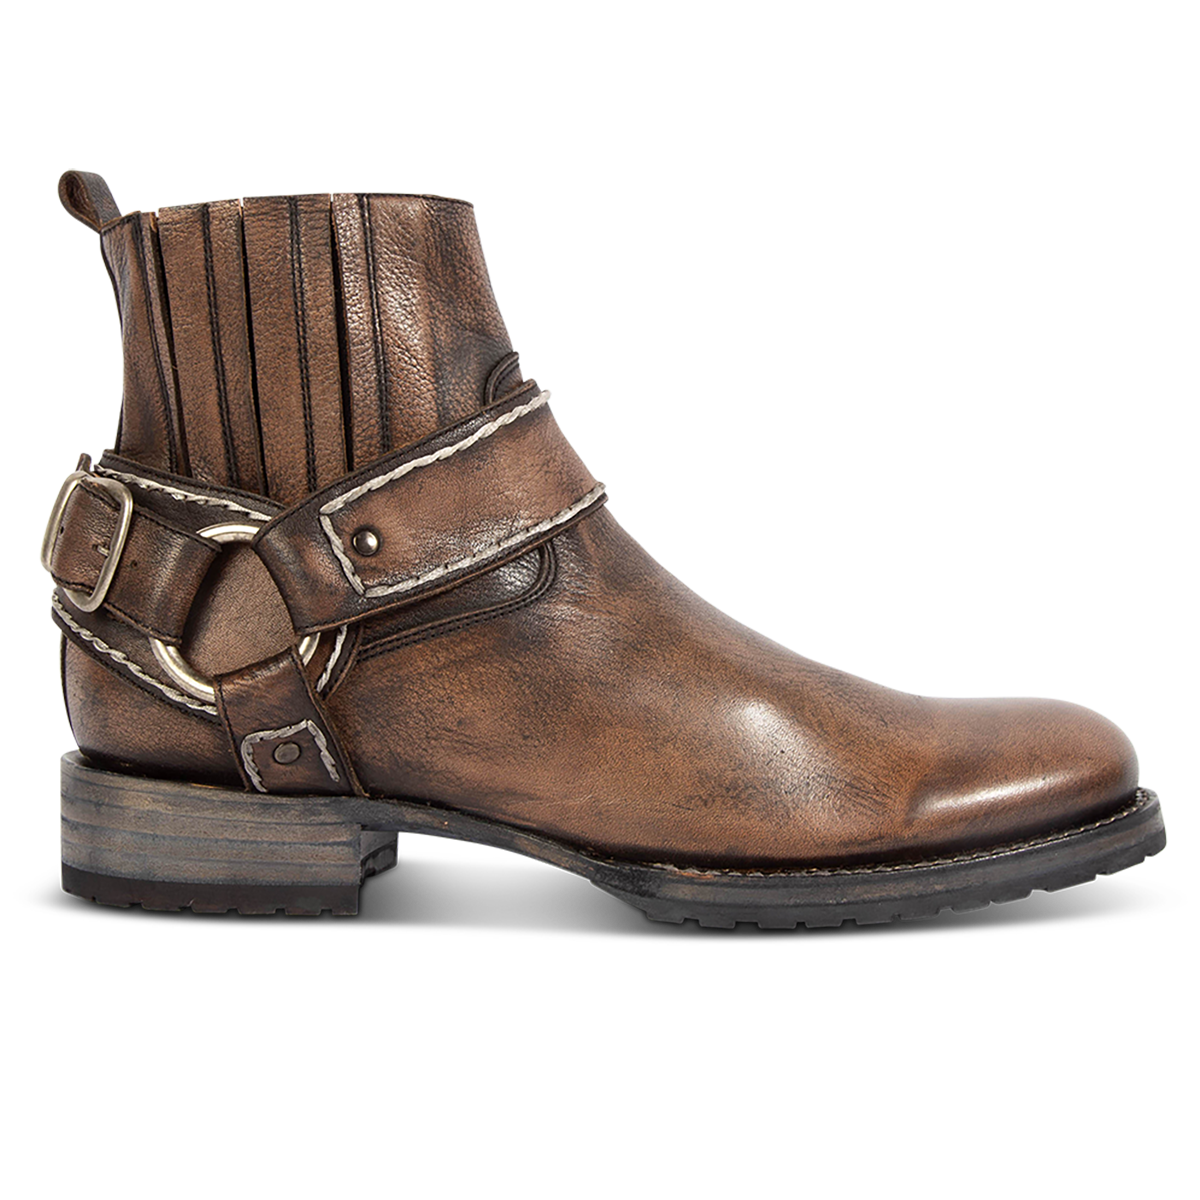 FREEBIRD men's Dallas brown distressed leather boot with an inside zip closure, leather ankle harness and gore detailing